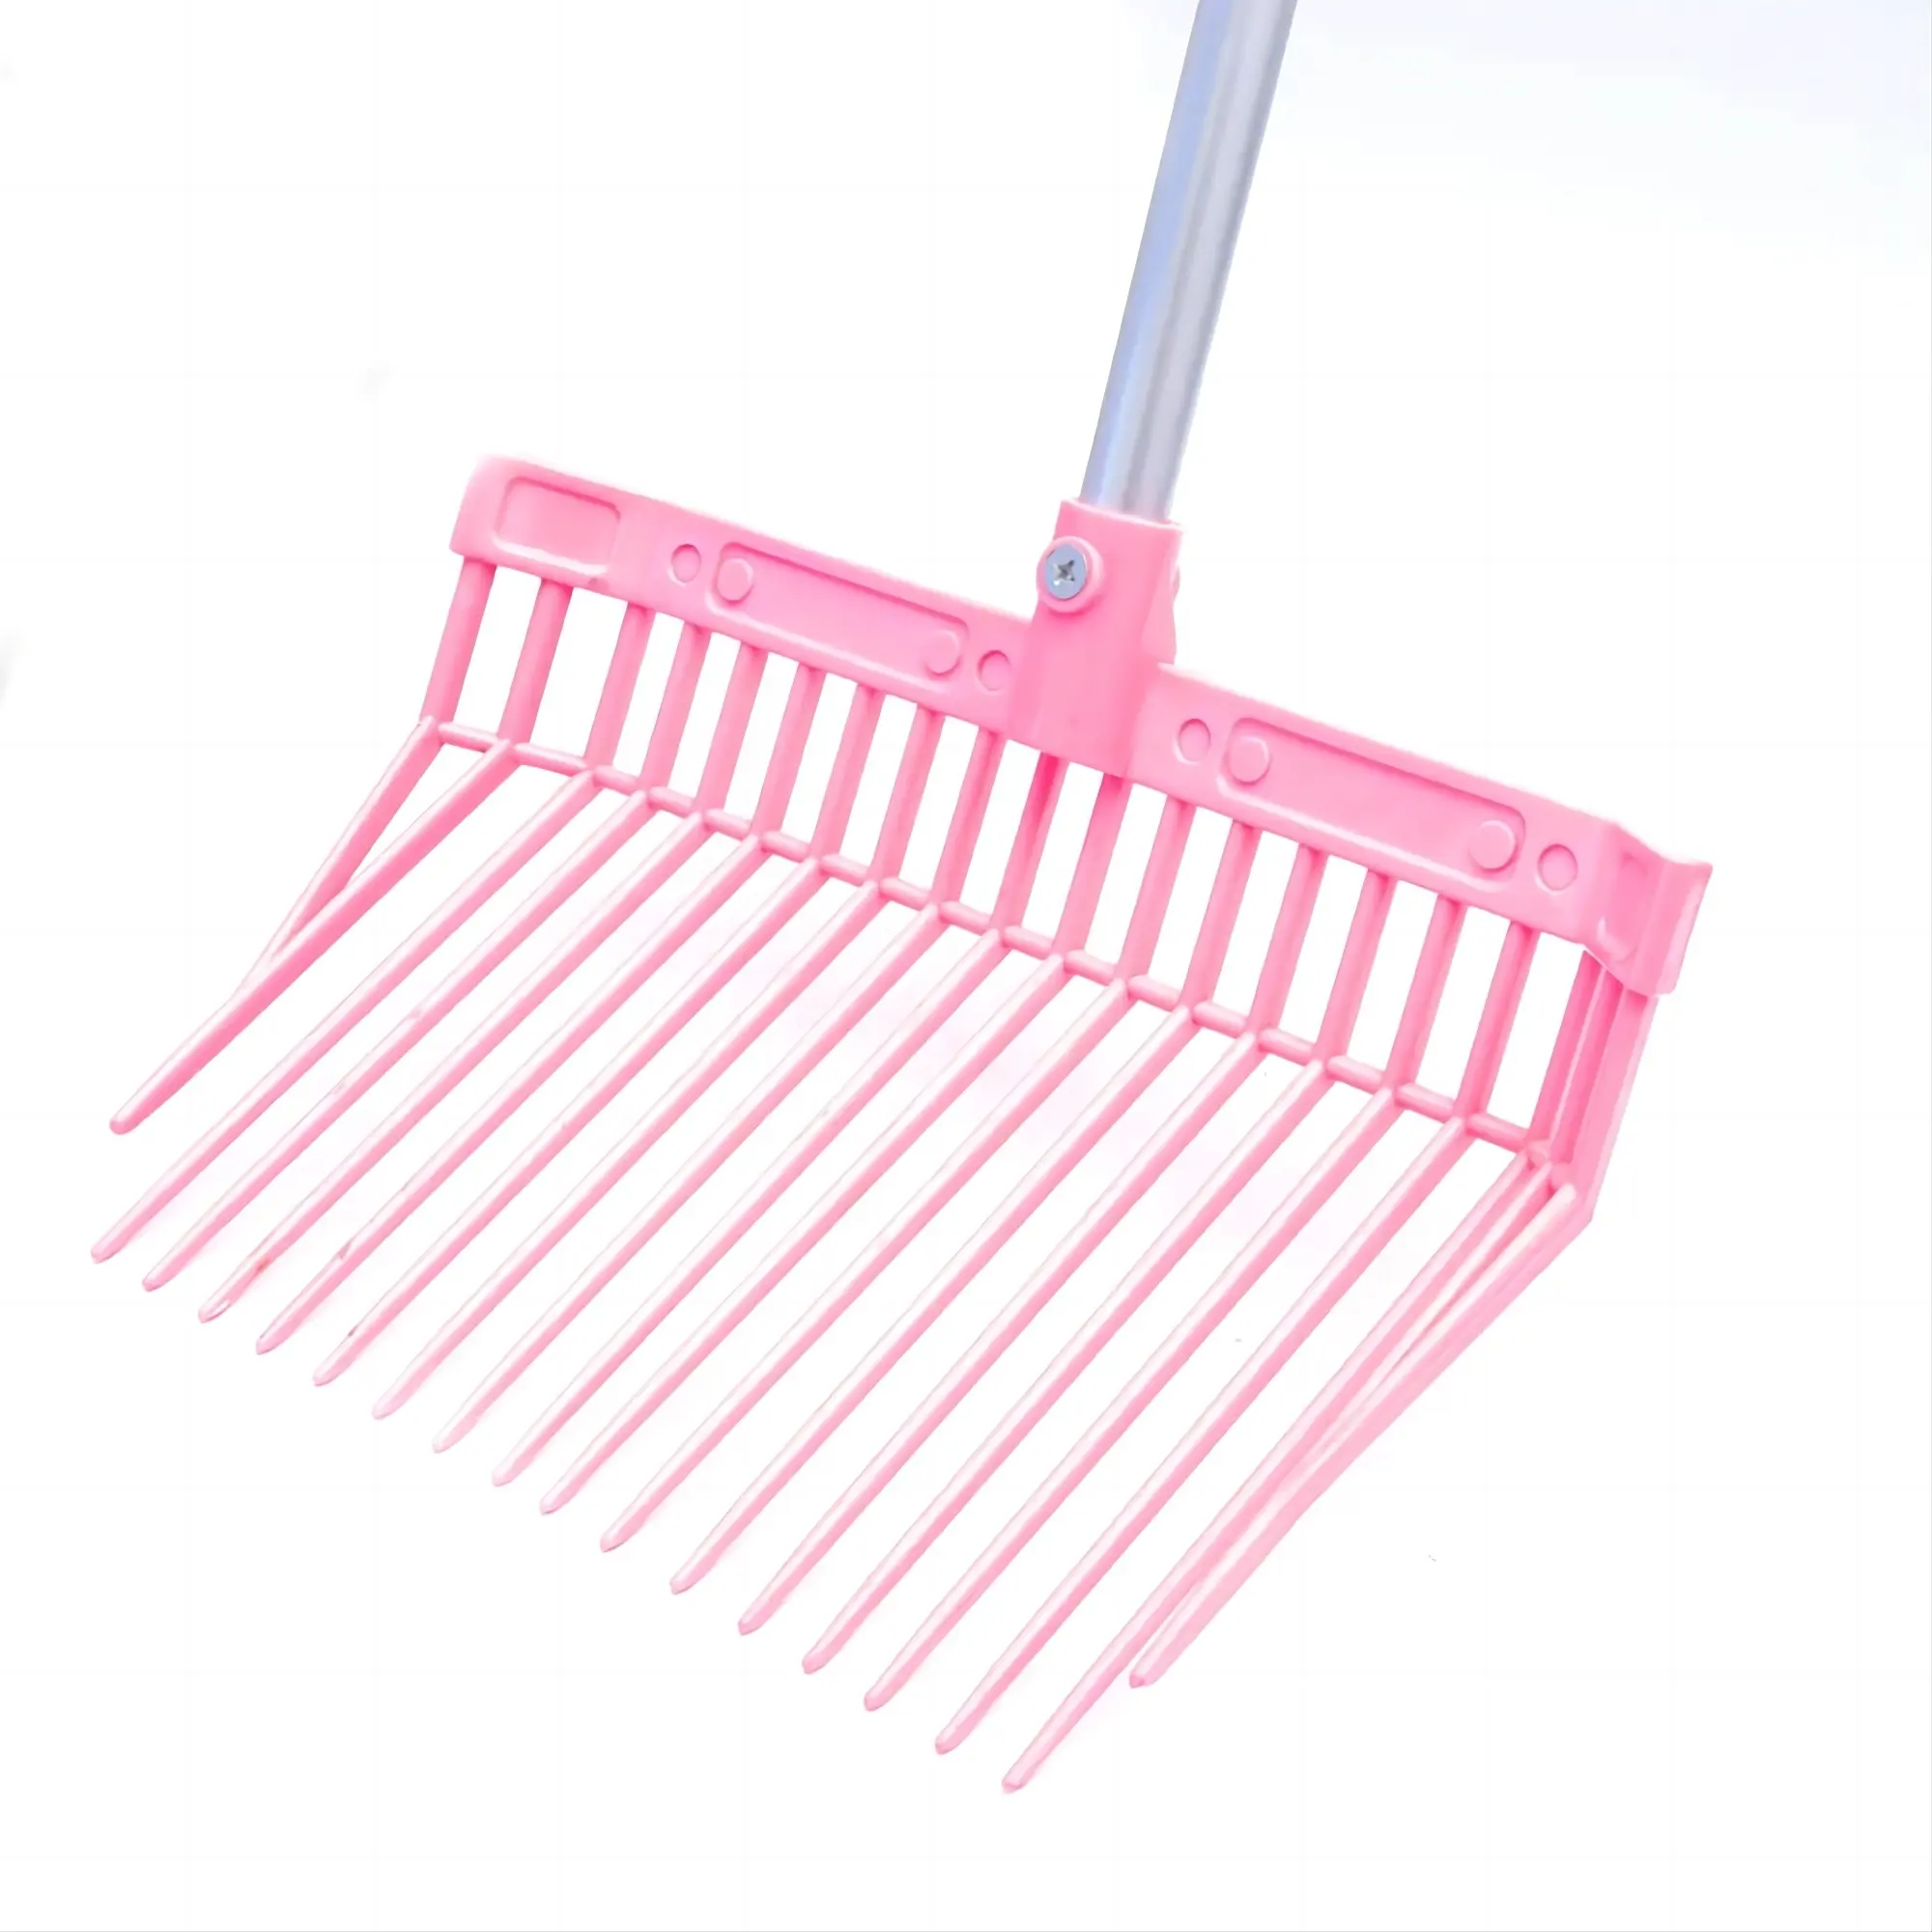 Plastic Horse Stable Fork Manure Fork for Household Cleaning Tools & Accessories